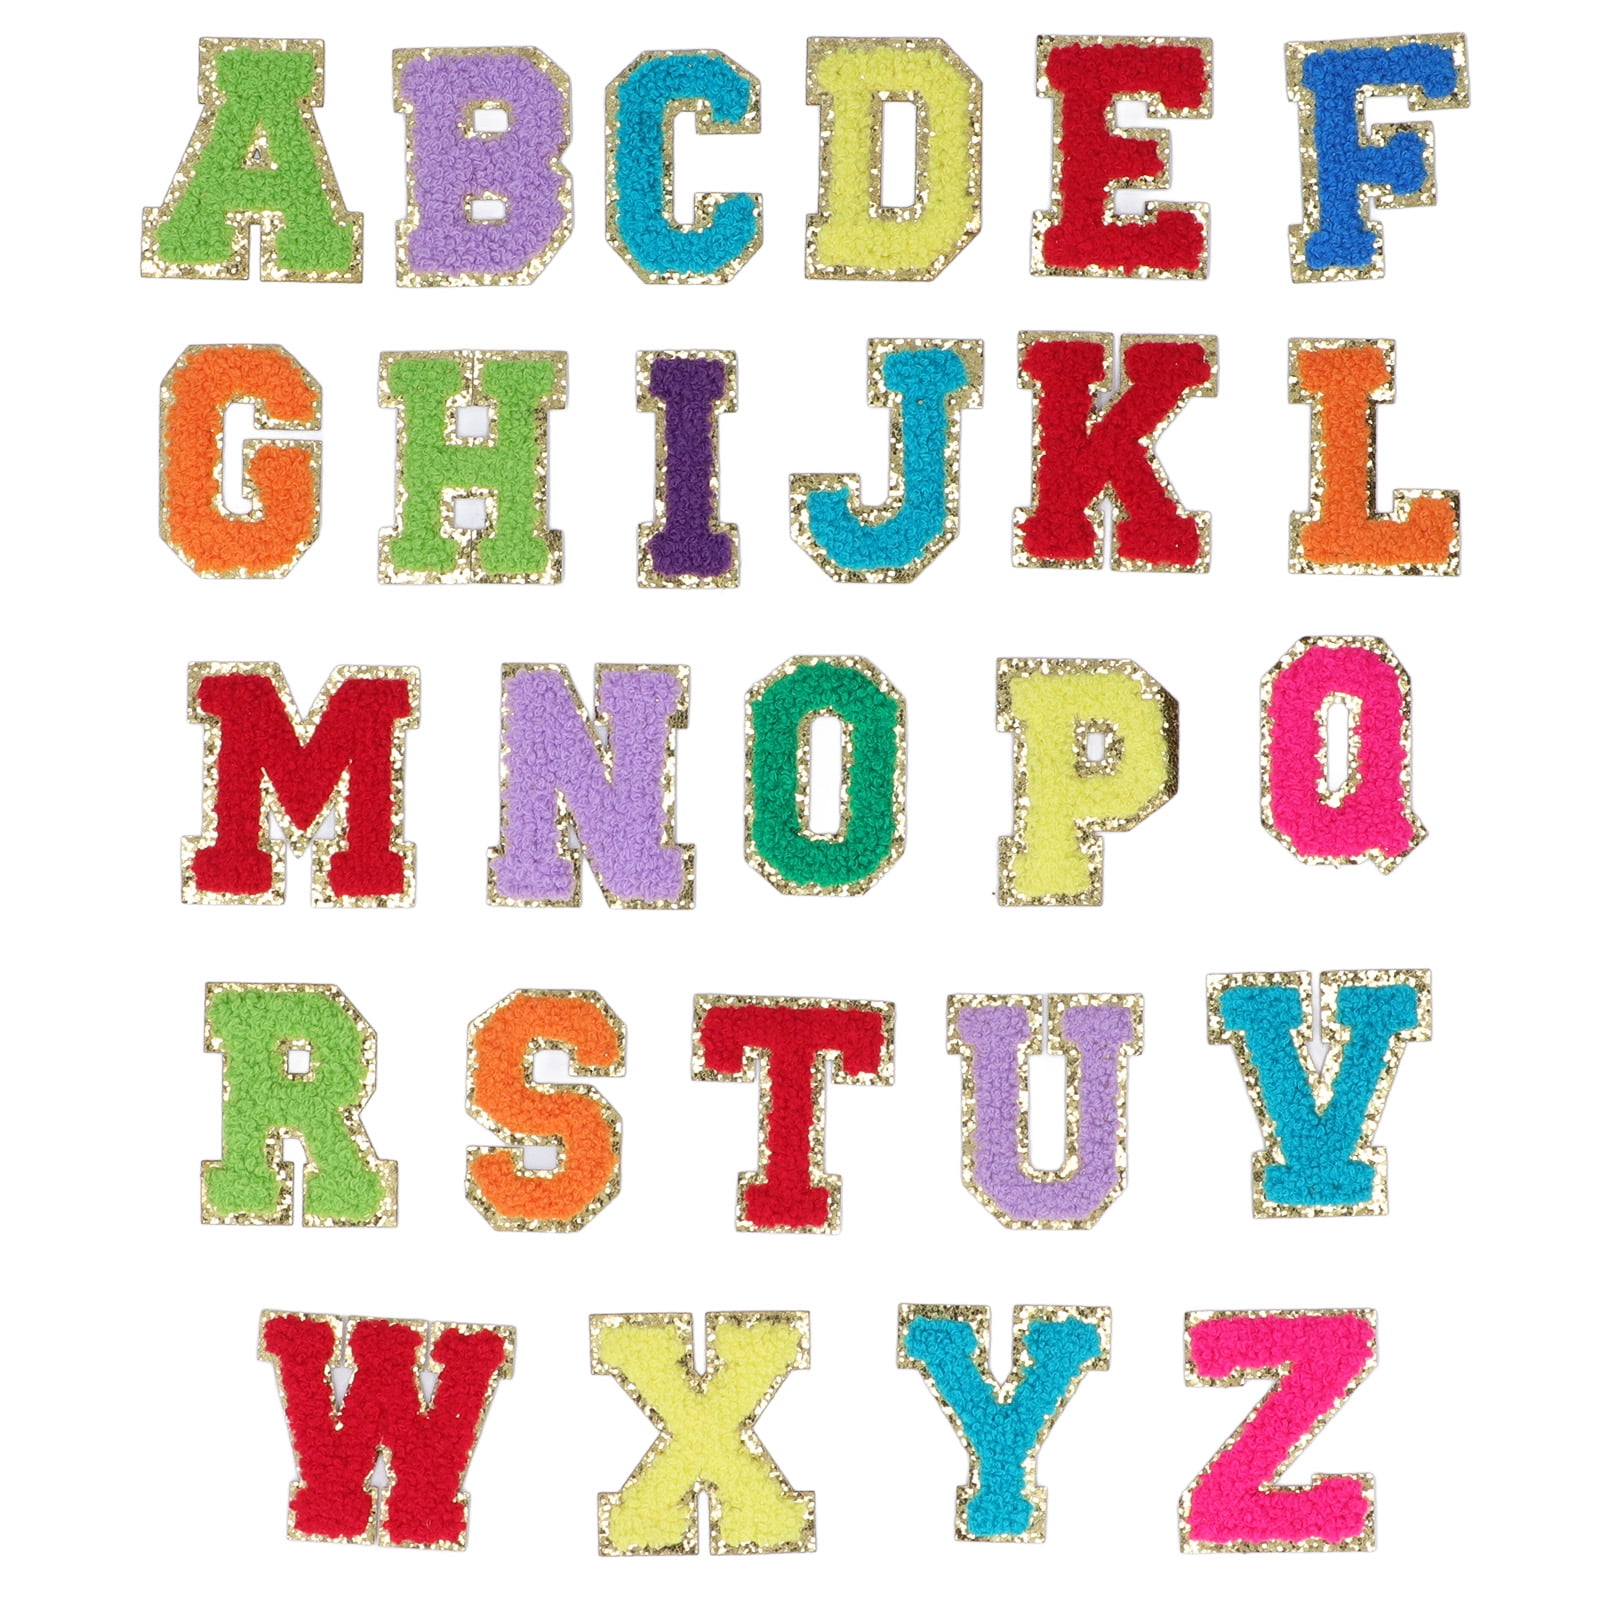 Letter A-Z Embroidered Iron On Patches for Clothing Bags Hats Dress Craft DIY 